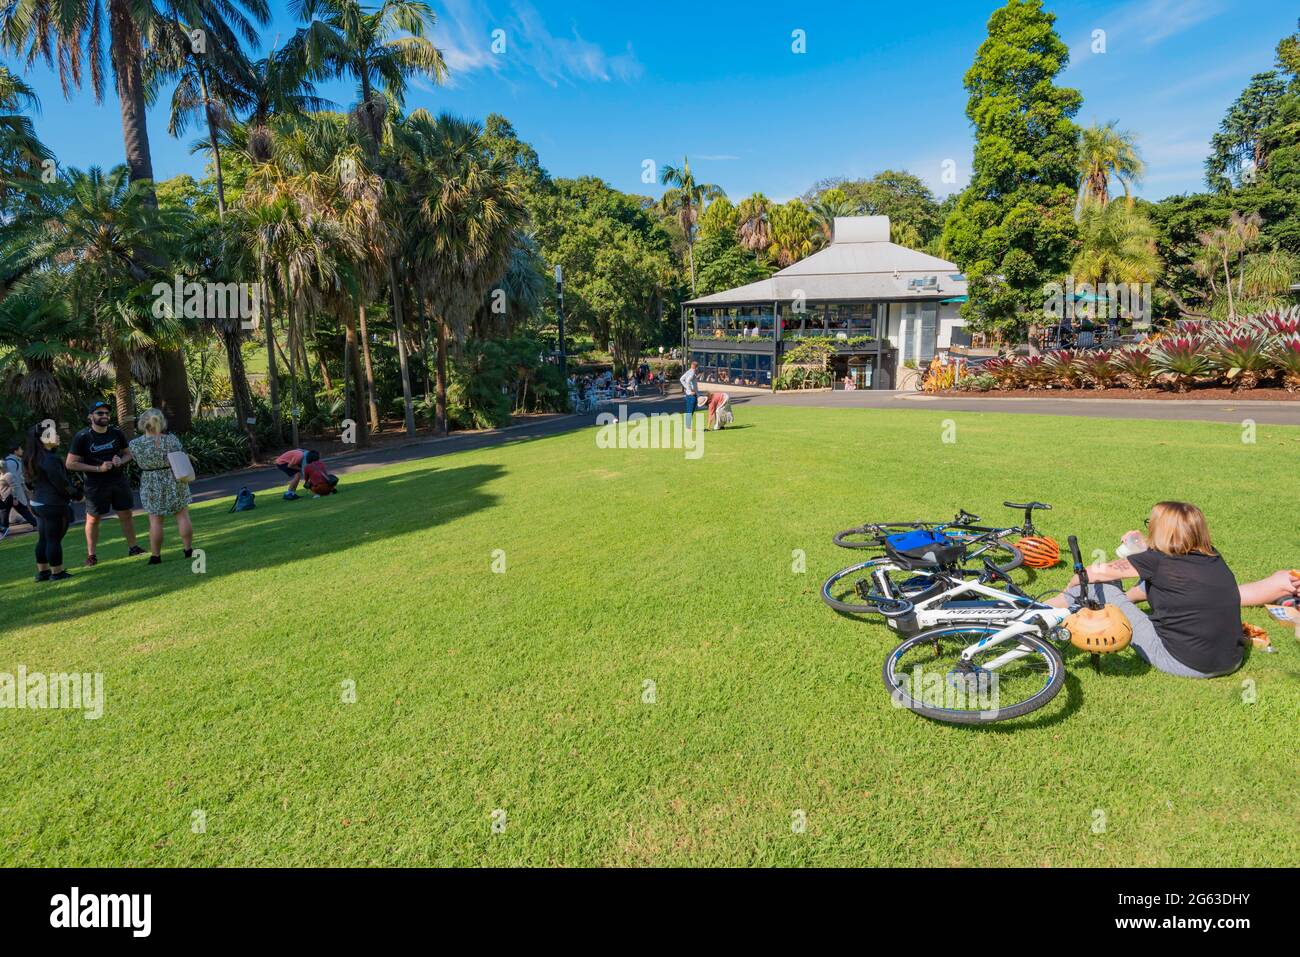 A restaurant and cafe and people enjoying sunny April warmth in the Royal Botanic Gardens, Sydney, Australia Stock Photo